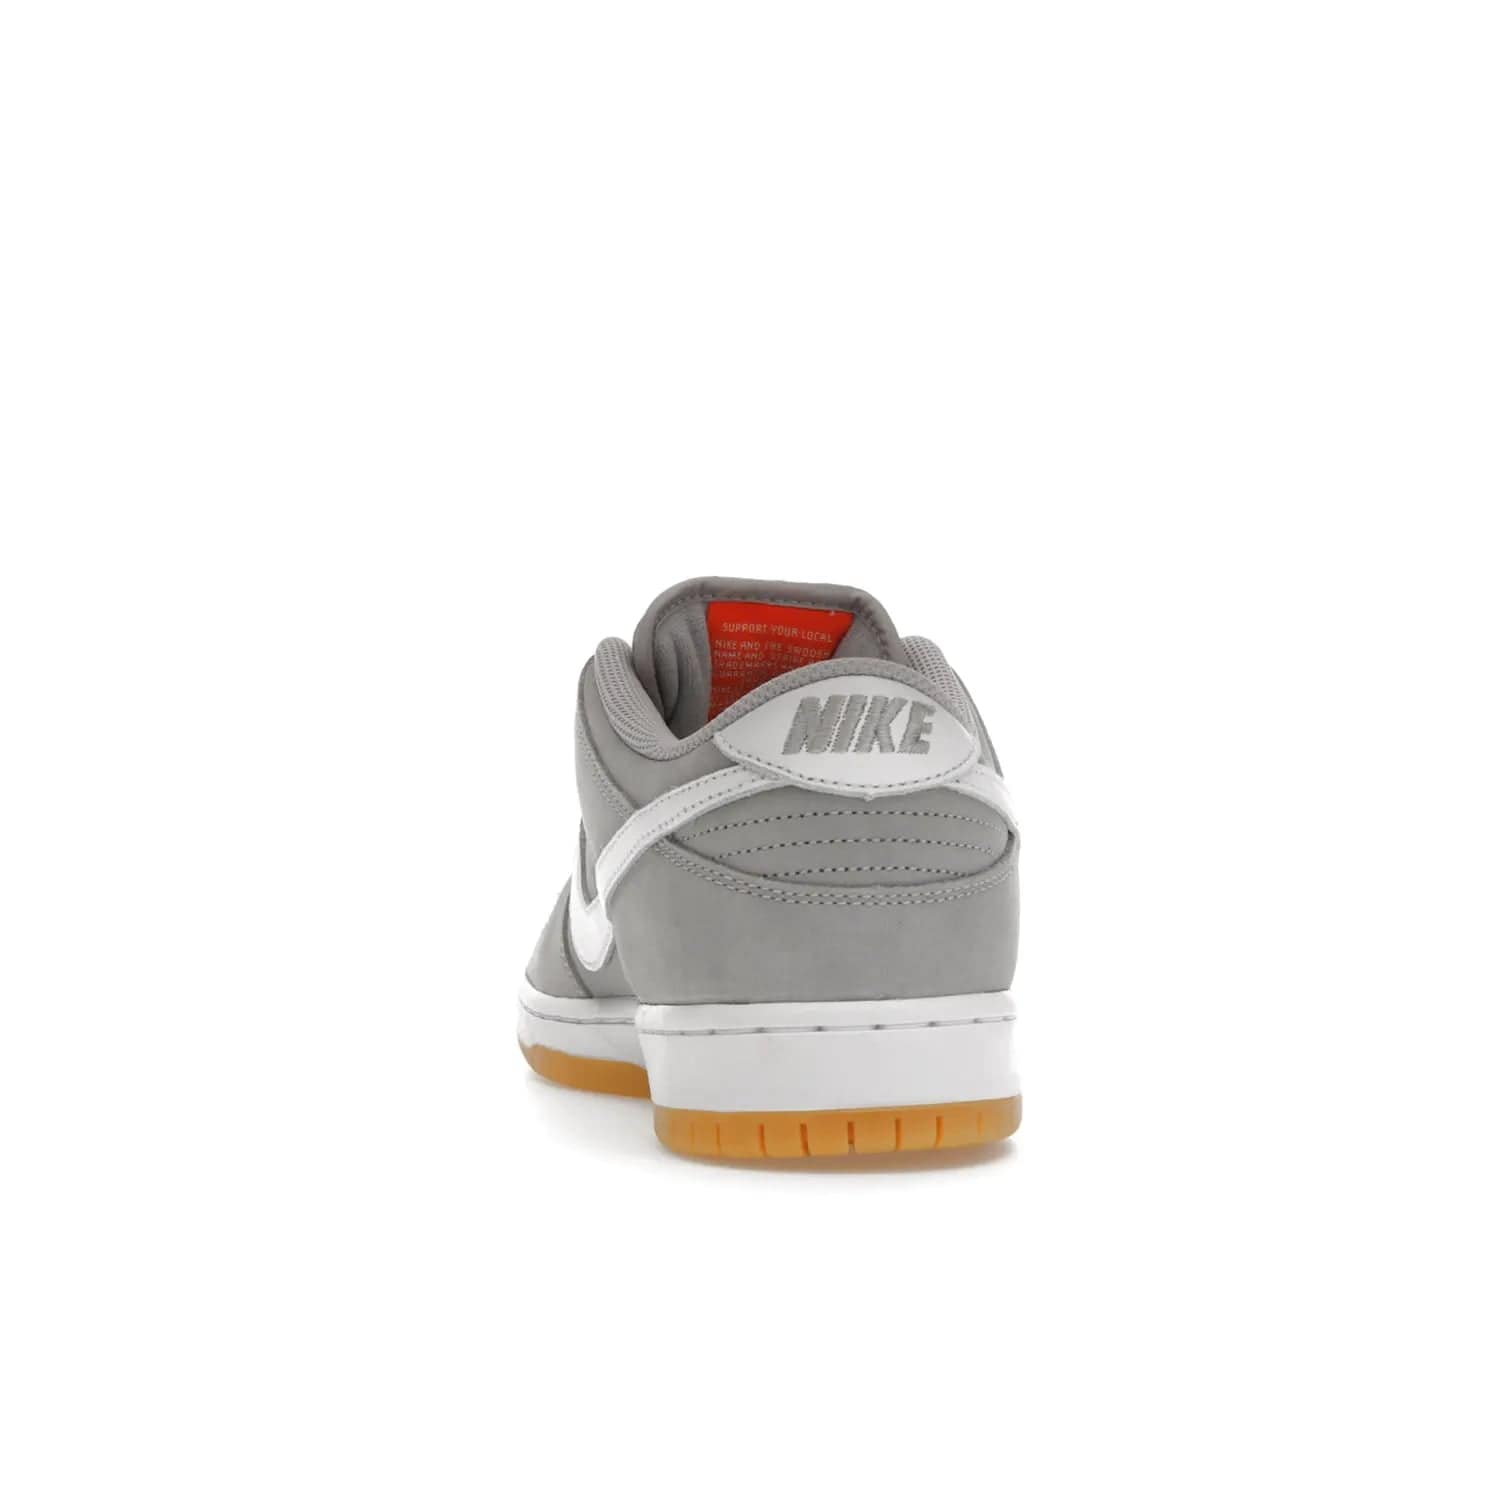 Nike SB Dunk Low Pro ISO Orange Label Wolf Grey Gum - Image 27 - Only at www.BallersClubKickz.com - Introducing Nike's SB Dunk Low Pro ISO Orange Label Wolf Grey Gum - a stylish shoe with a premium Wolf Grey upper, white leather Nike Swoosh, and an eye-catching gum outsole. With special Nike branding and packaging, this shoe adds a unique fashion statement. Out Feb. 24, 2023.